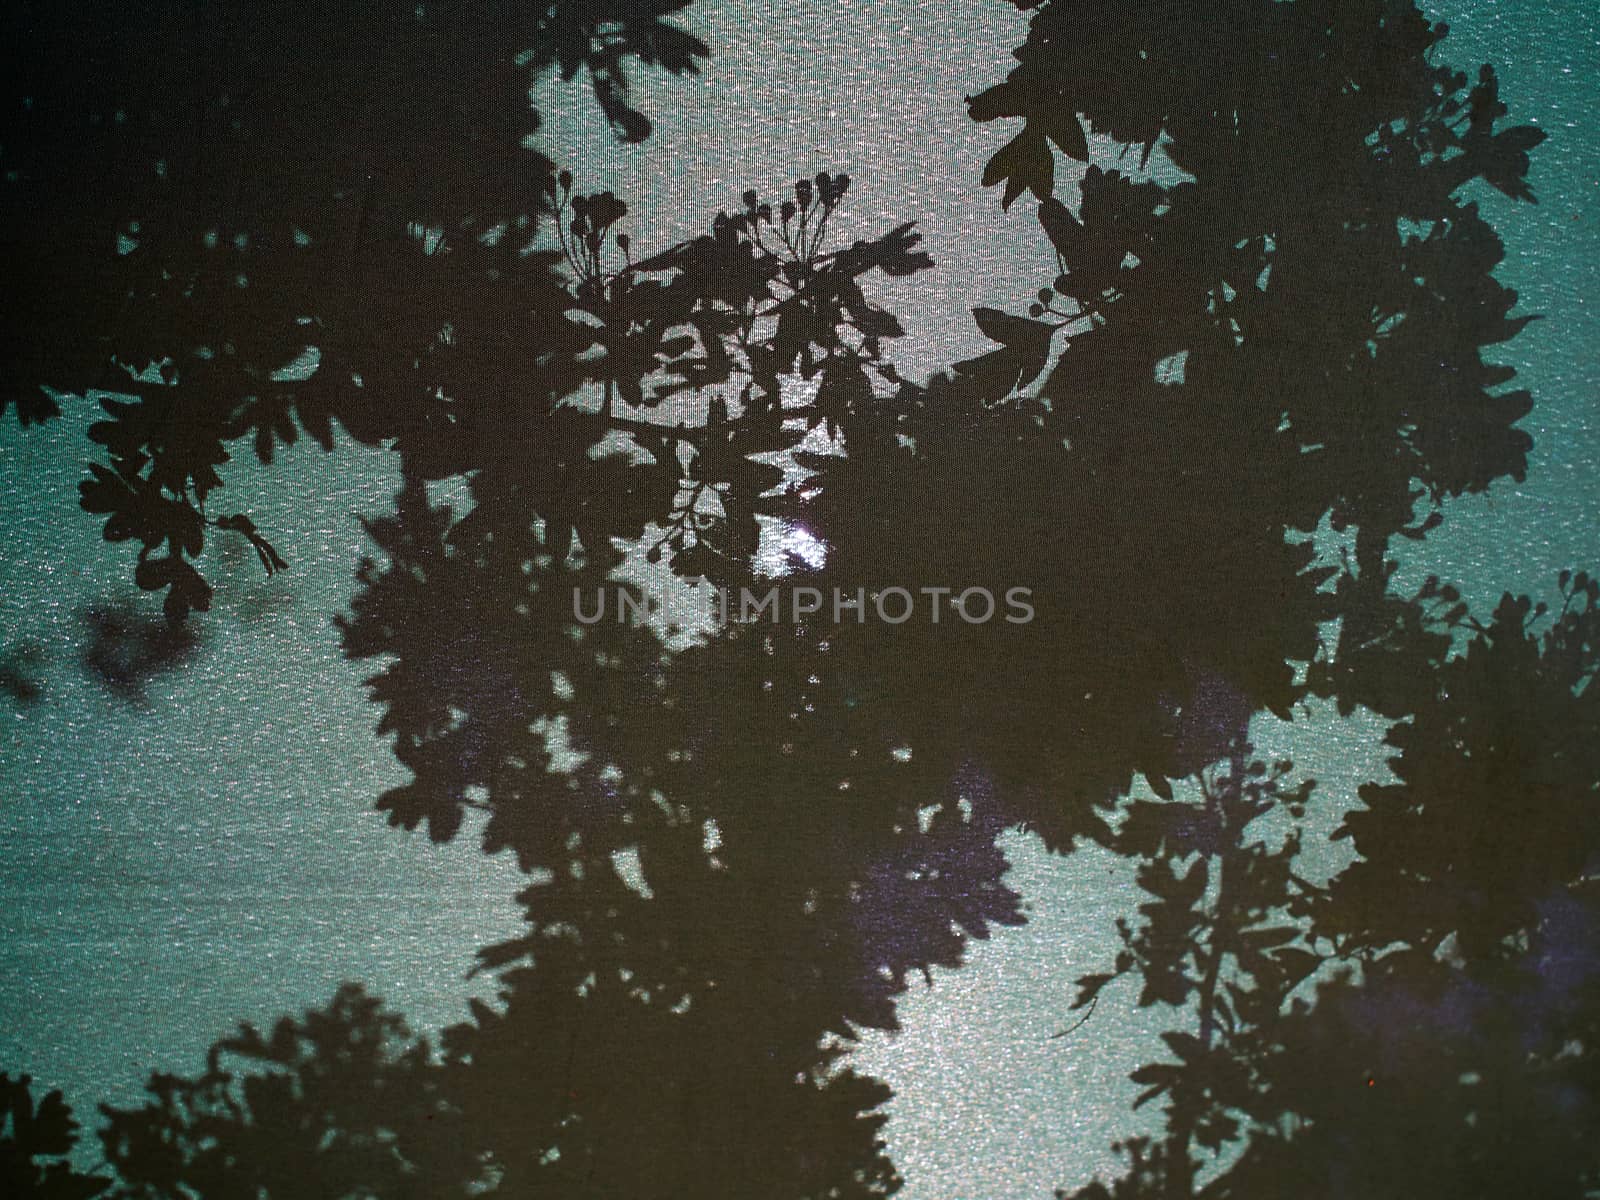 Shadow of tree and leaves on a bright sunny day gardening background image